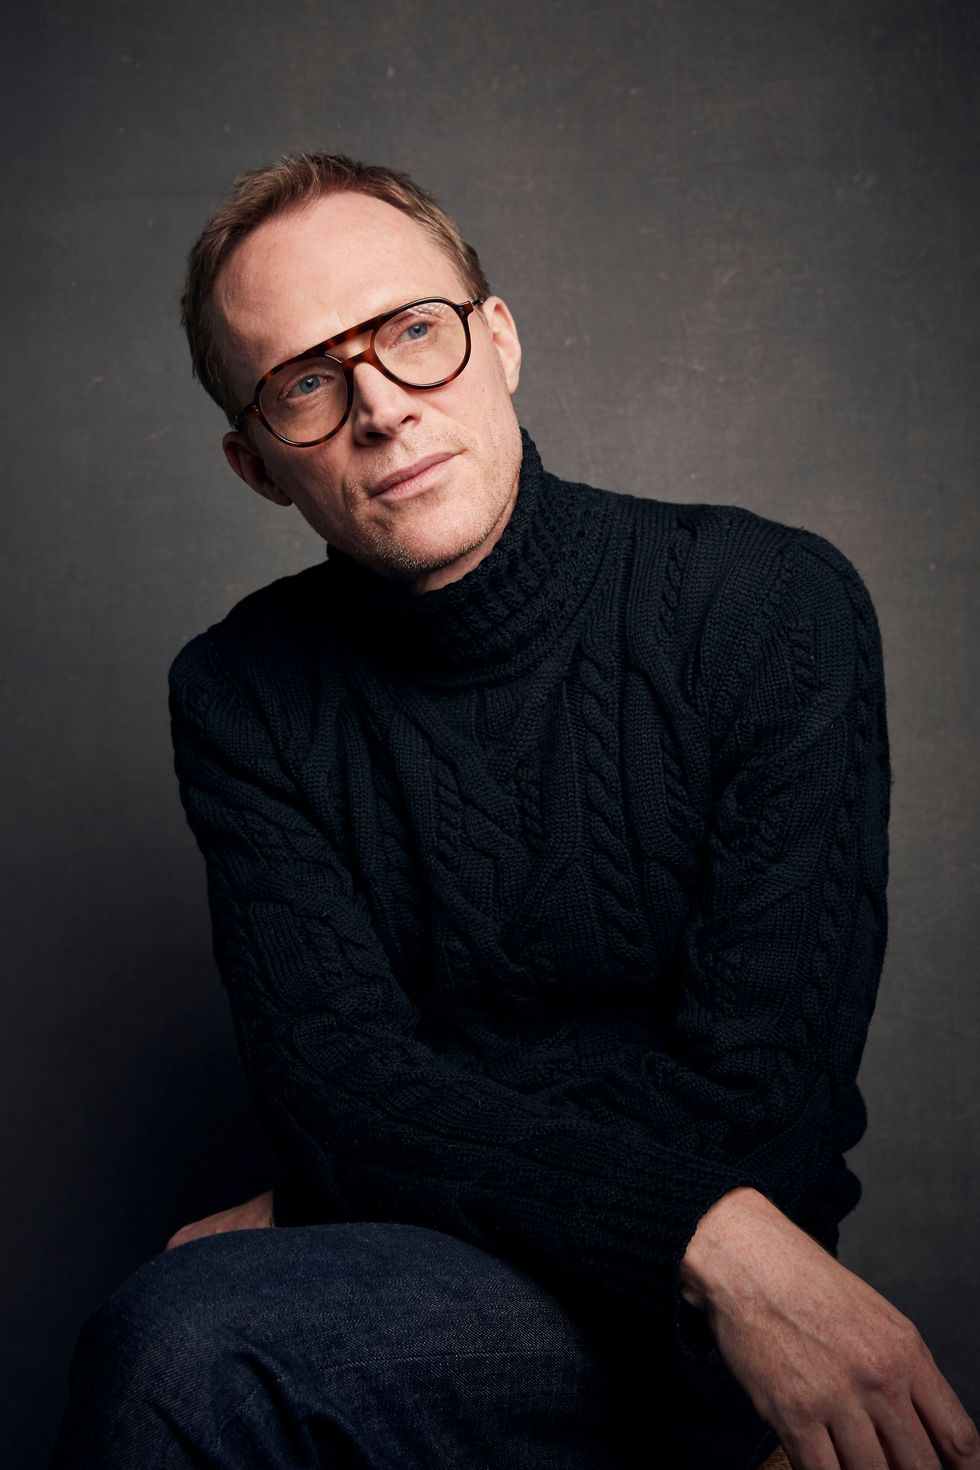 mandatory credit photo by taylor jewellinvisionapshutterstock 10540027a
paul bettany poses for a portrait to promote the film uncle frank at the music lodge during the sundance film festival, in park city, utah
2020 sundance film festival   uncle frank portrait session, park city, usa   26 jan 2020